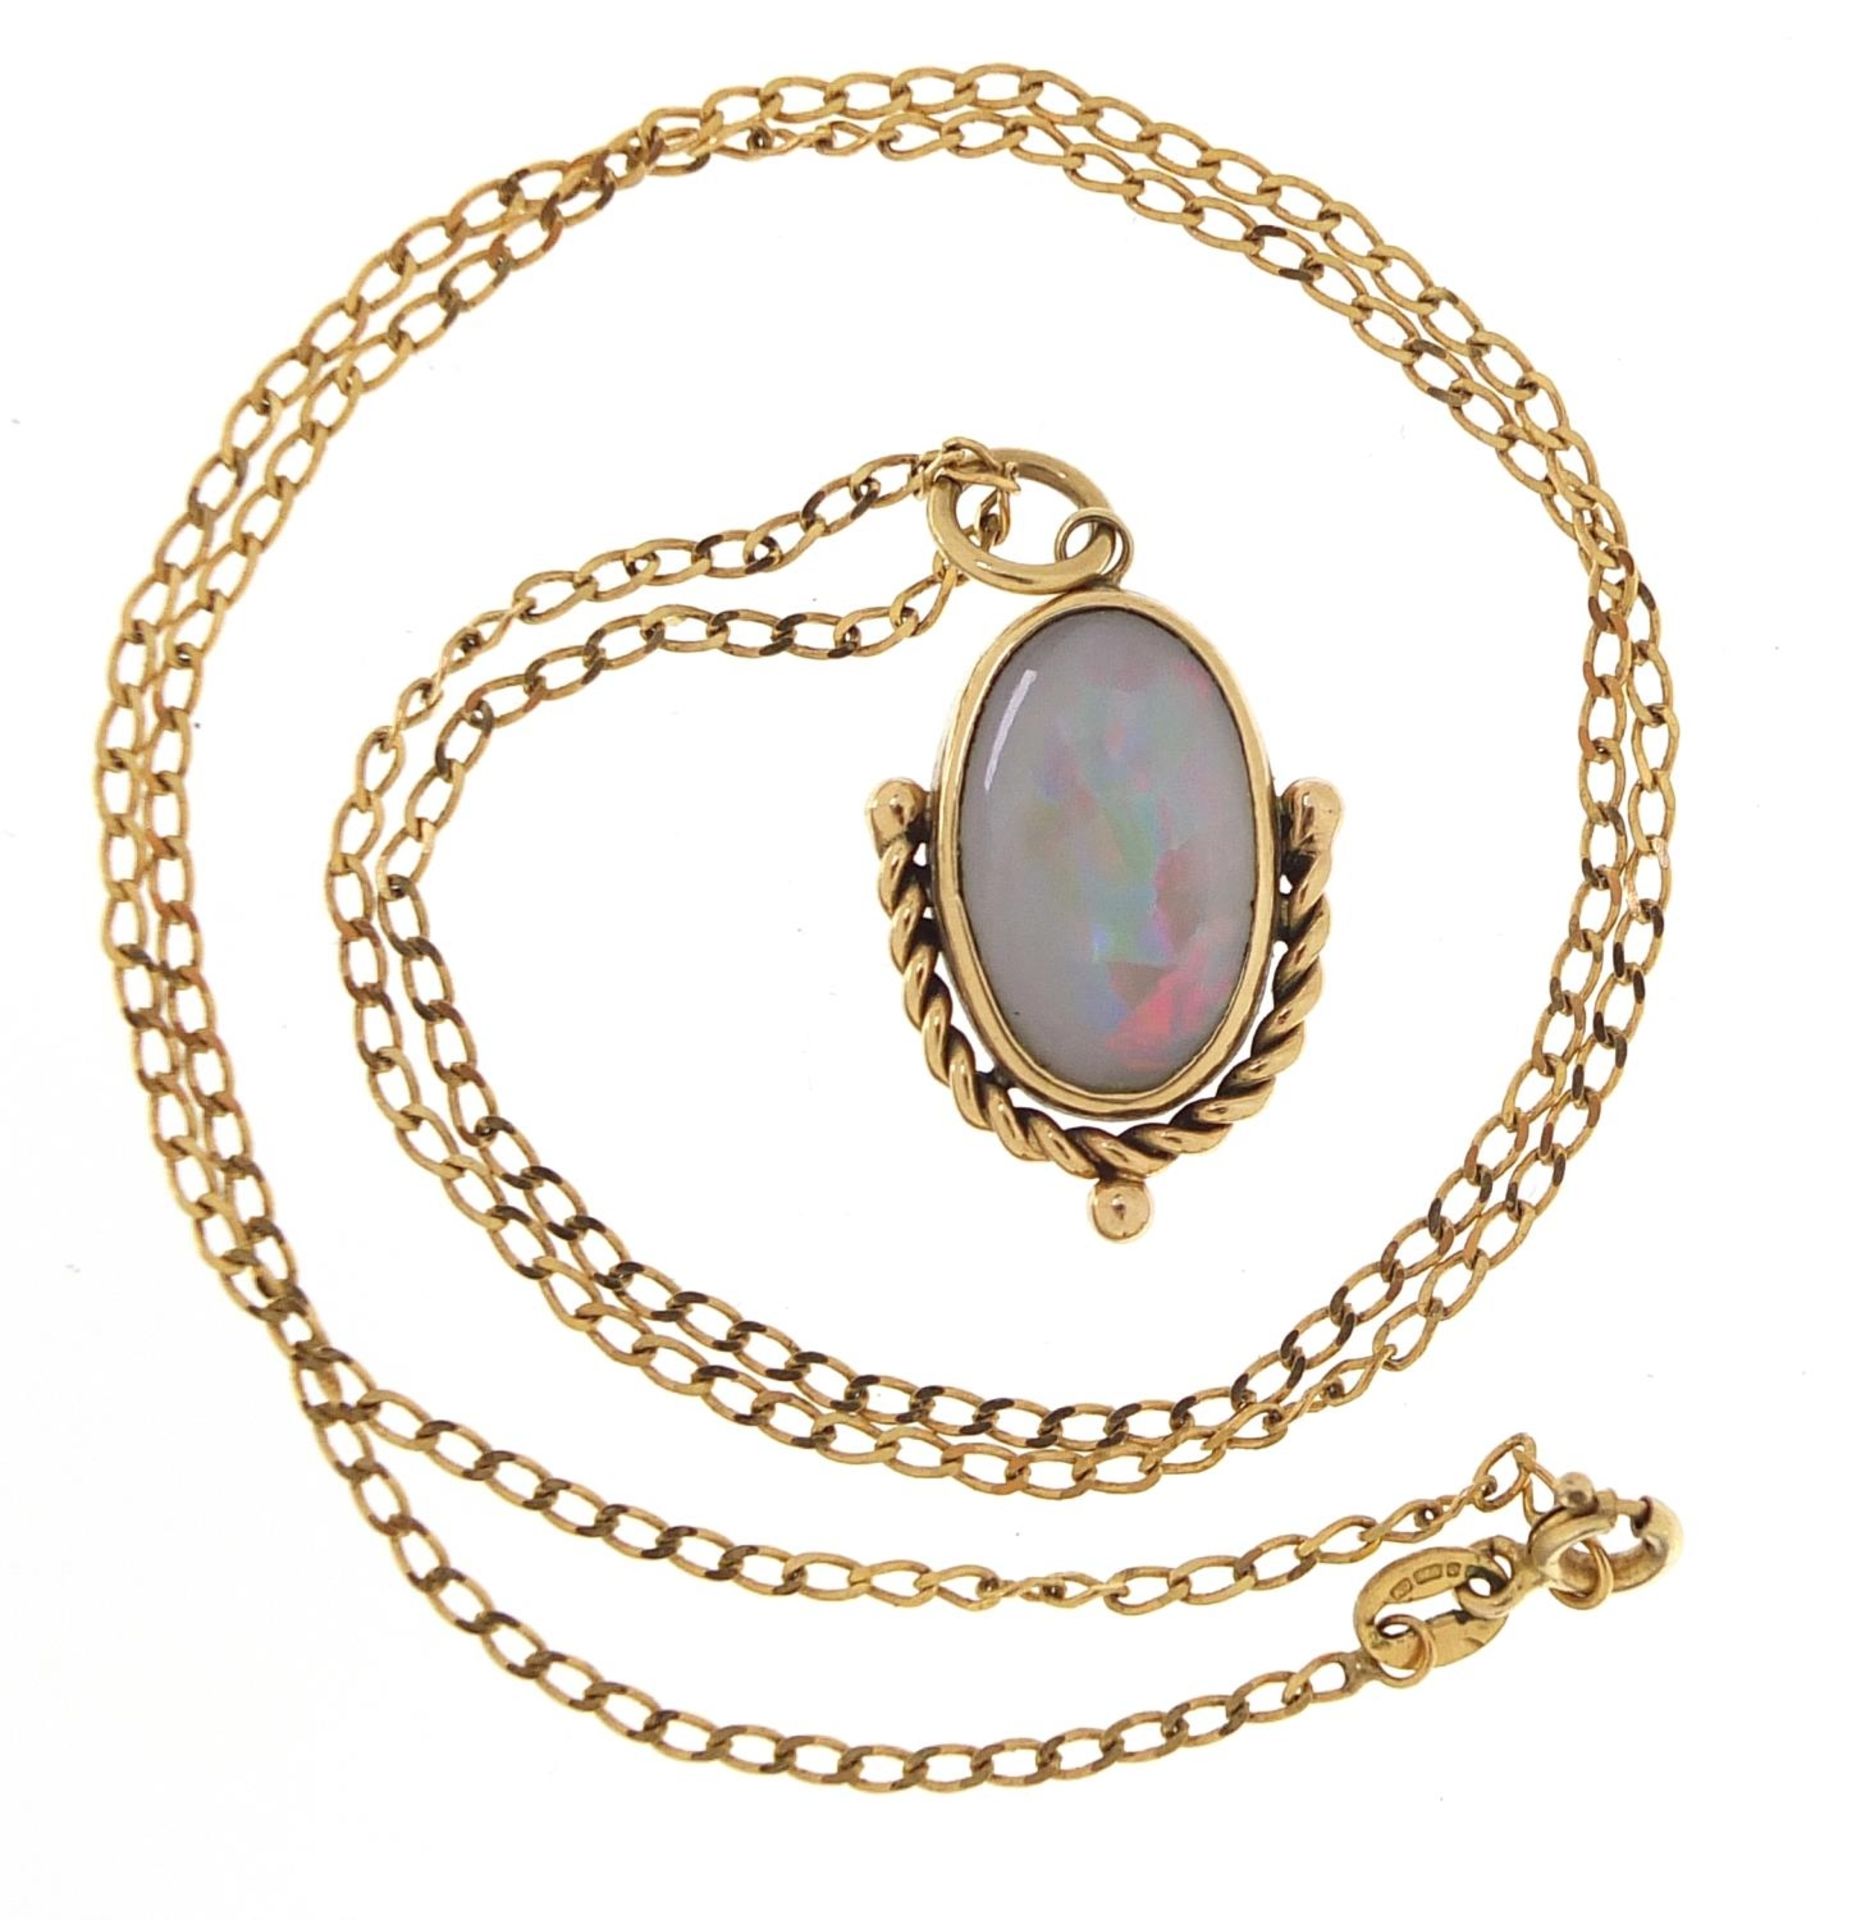 9ct gold opal pendant on a 9ct gold necklace, 2.7cm high and 46cm in length, 4.7g - Image 2 of 5